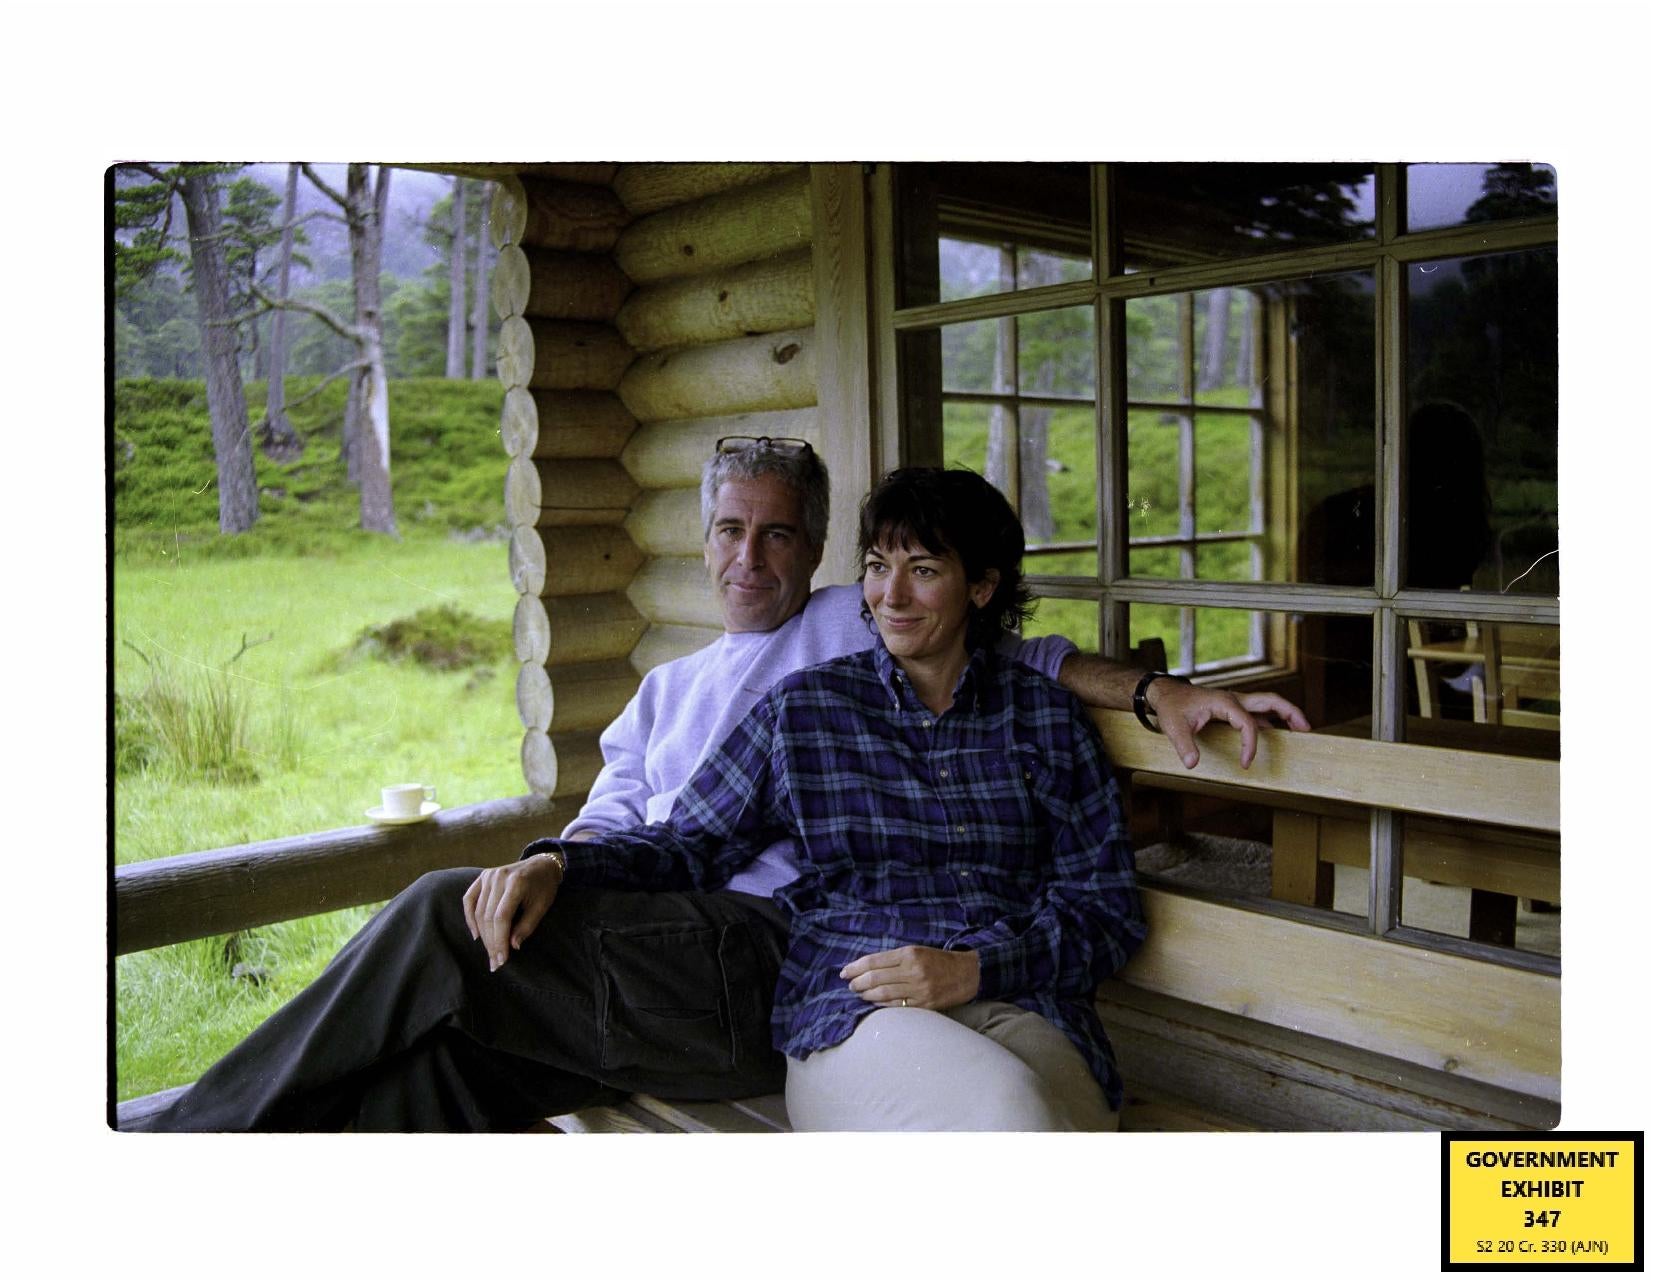 Ghislaine Maxwell with Jeffrey Epstein, which has been shown to the court during the sex trafficking trial of Maxwell (US Department of Justice/PA)